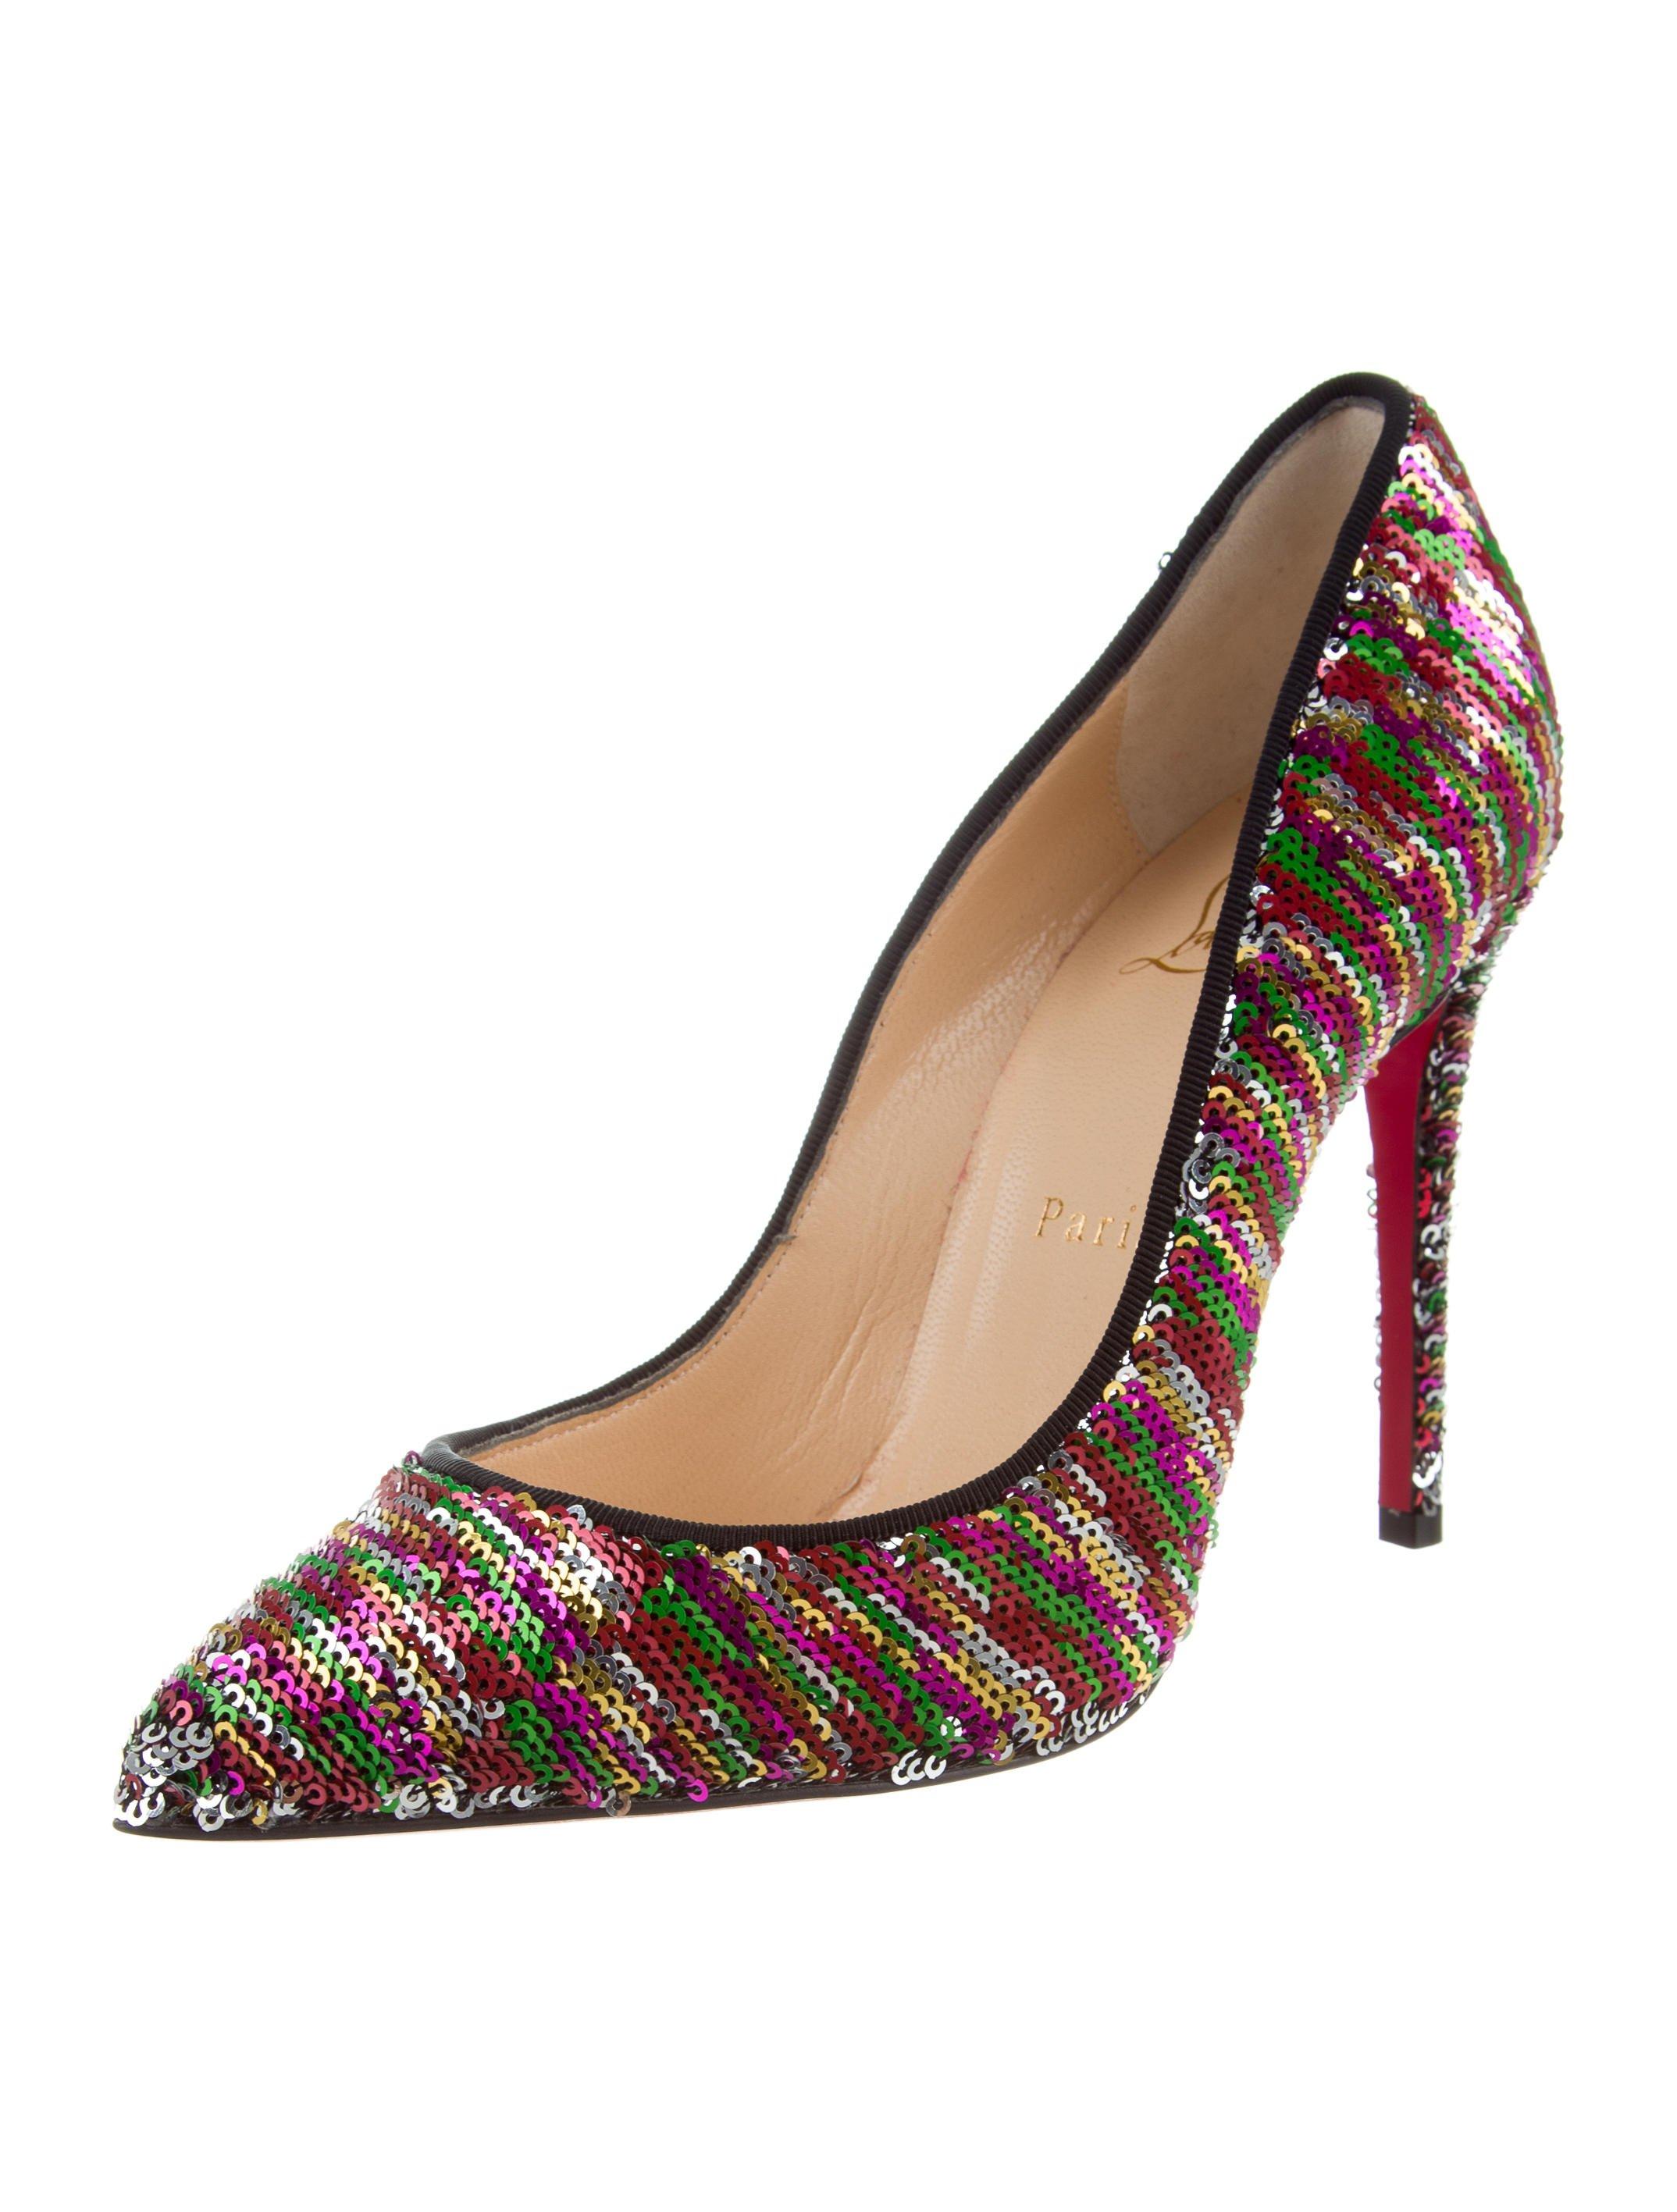 Black Christian Louboutin NEW Multi Color Woven and Sequin Evening Heels Pumps 